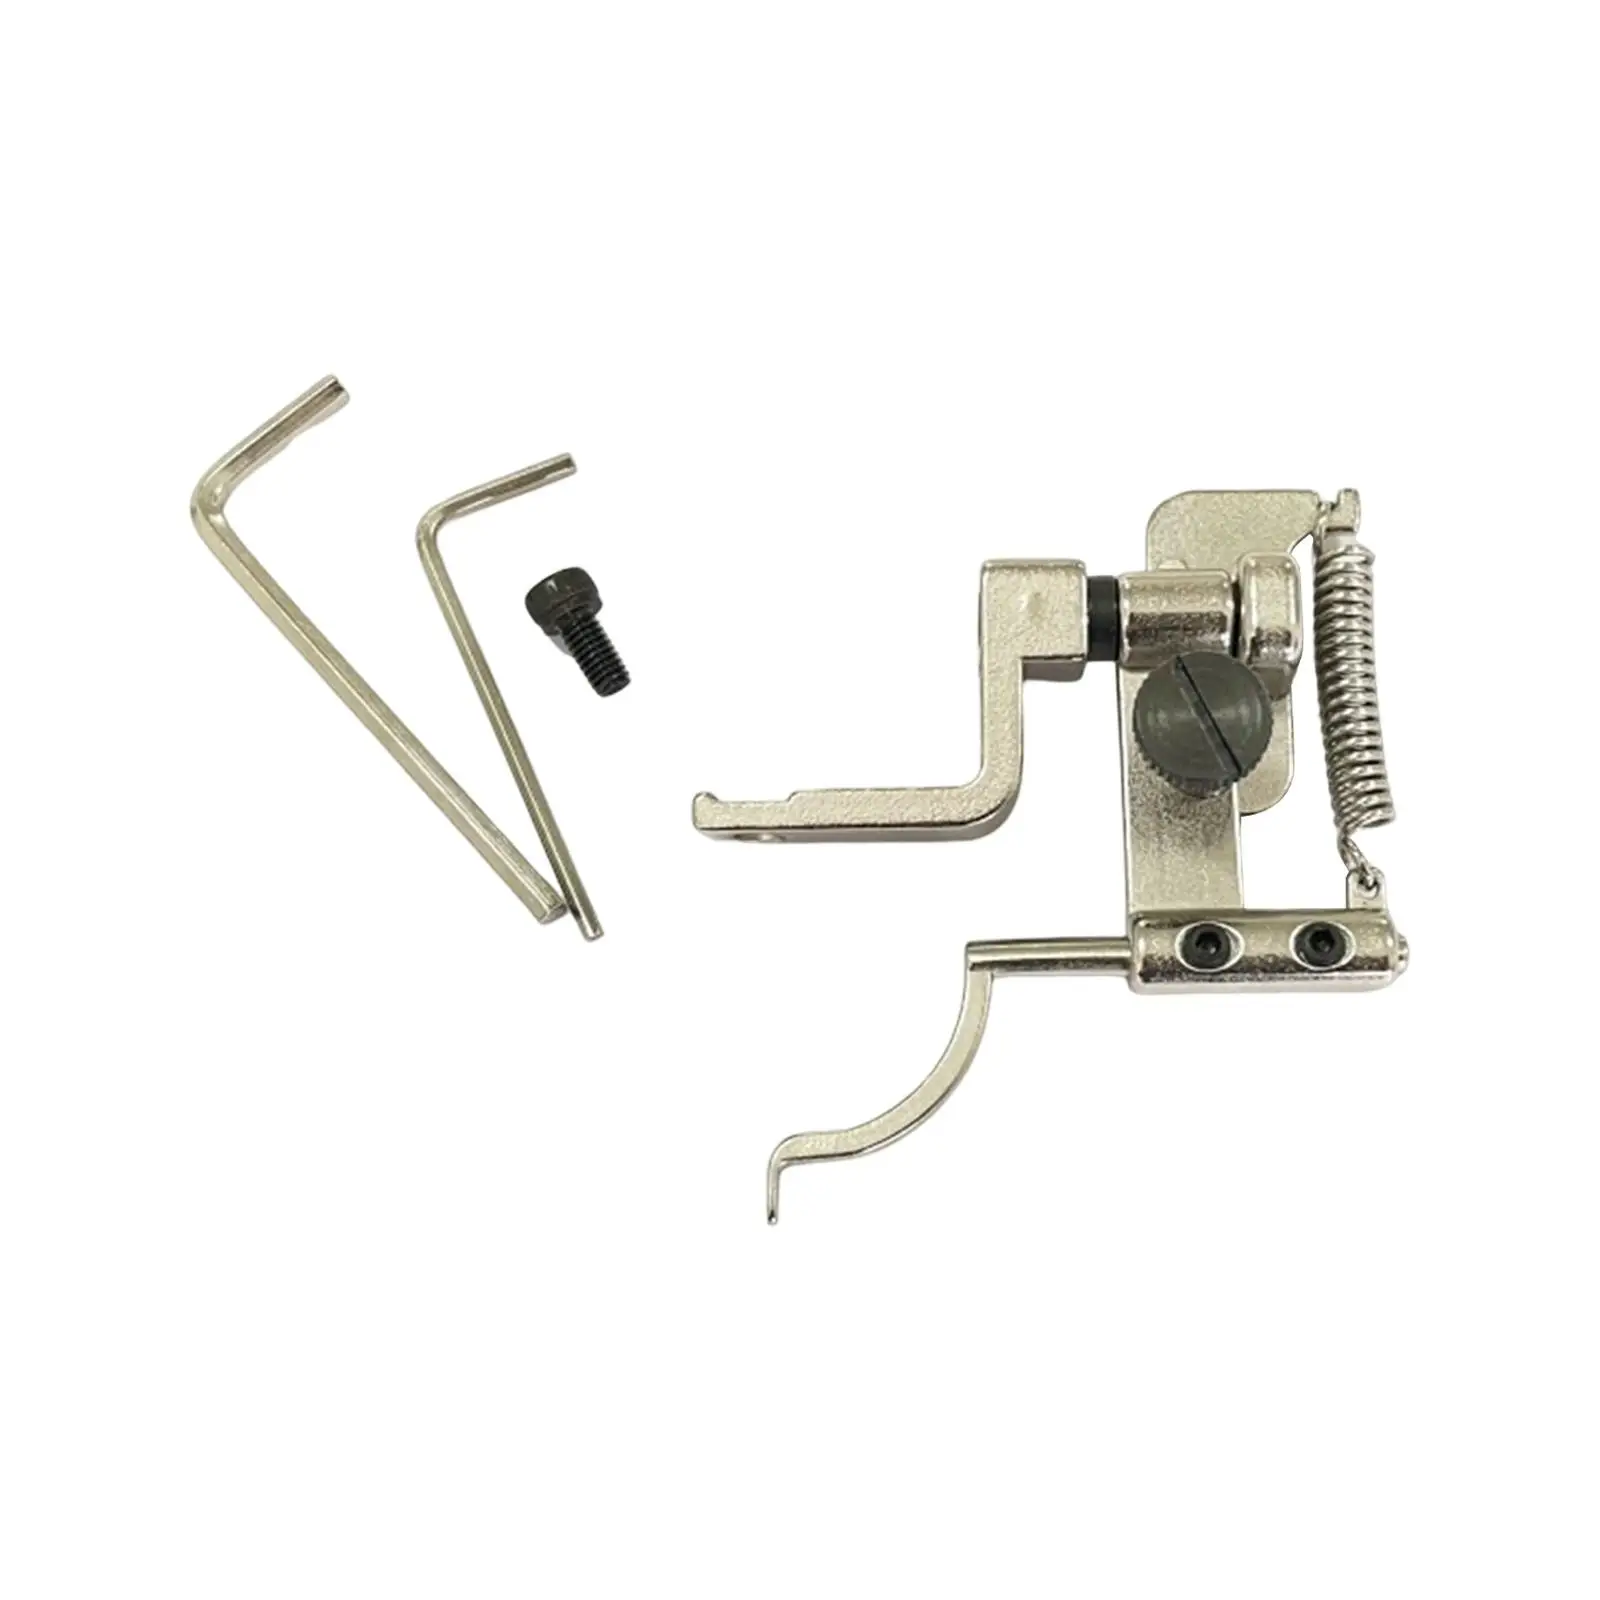 Suspended Edge Guide Seams Stitch Presser Edge Guide with Mounting Screws Universal Locator for Industrial Sewing Machines 891